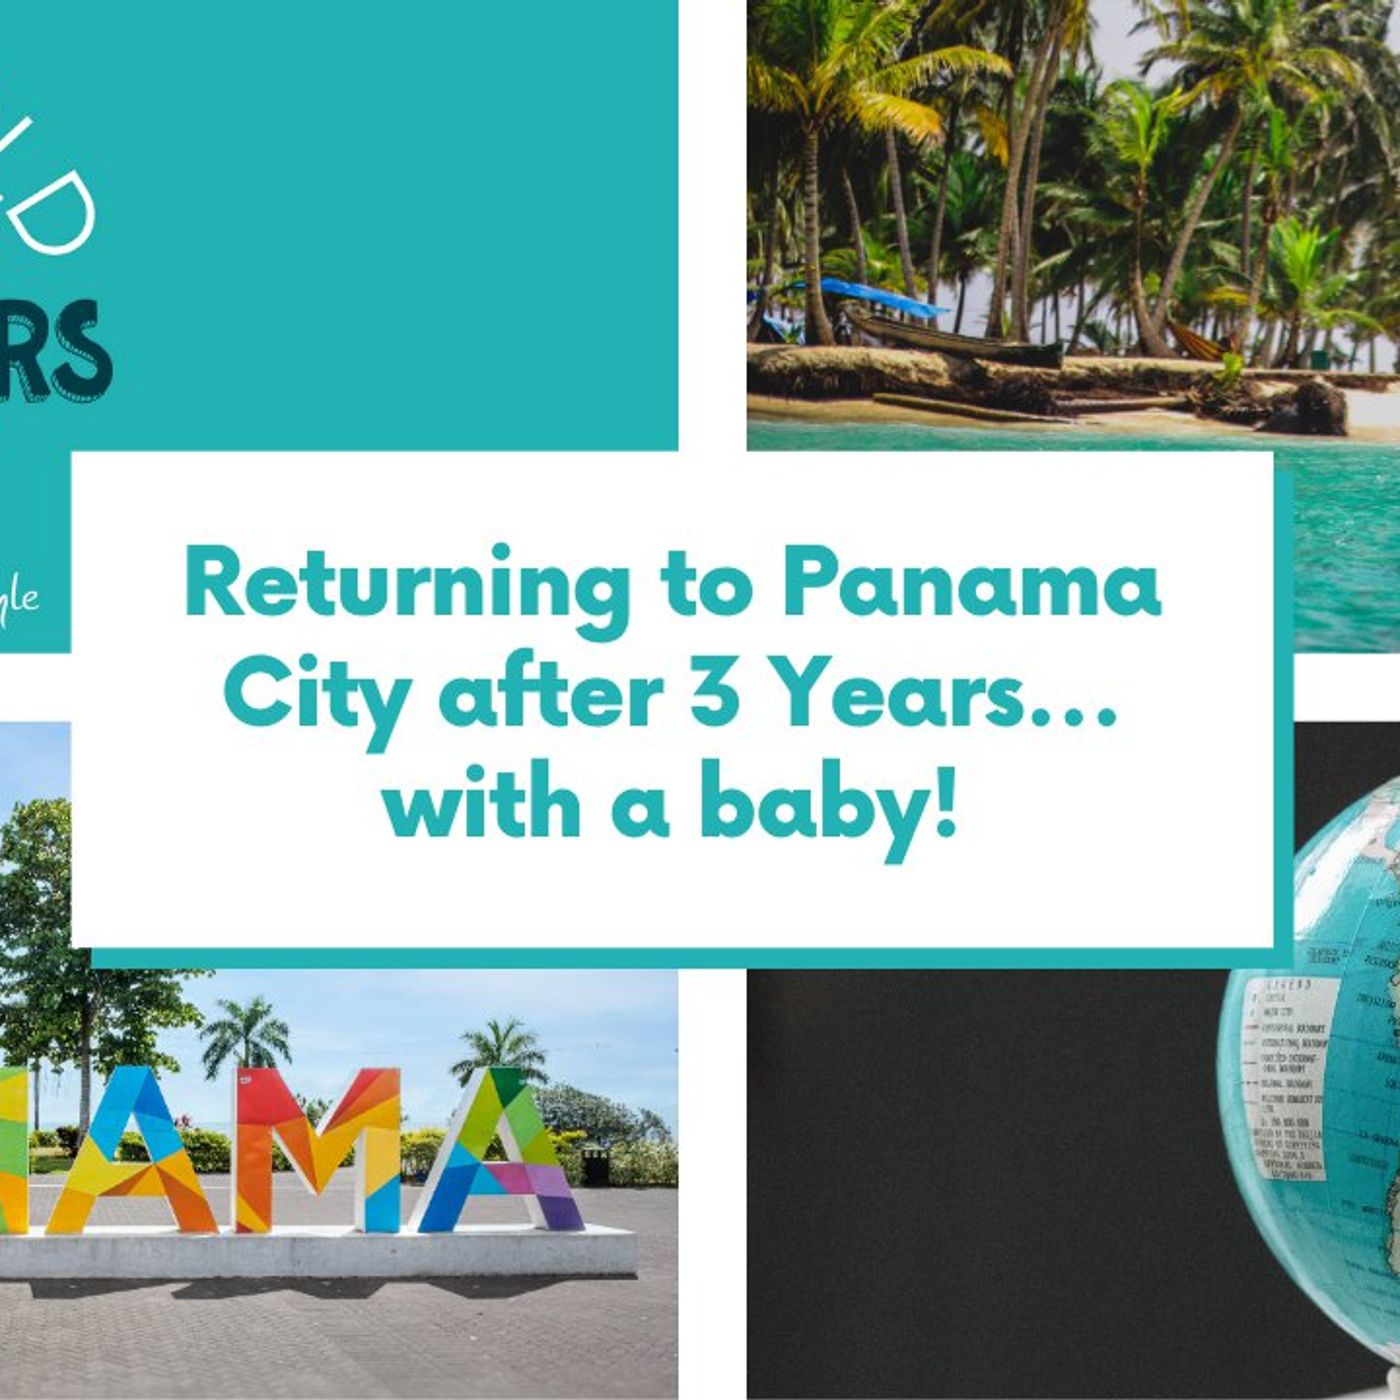 Returning to Panama City after 3 Years... with a baby!